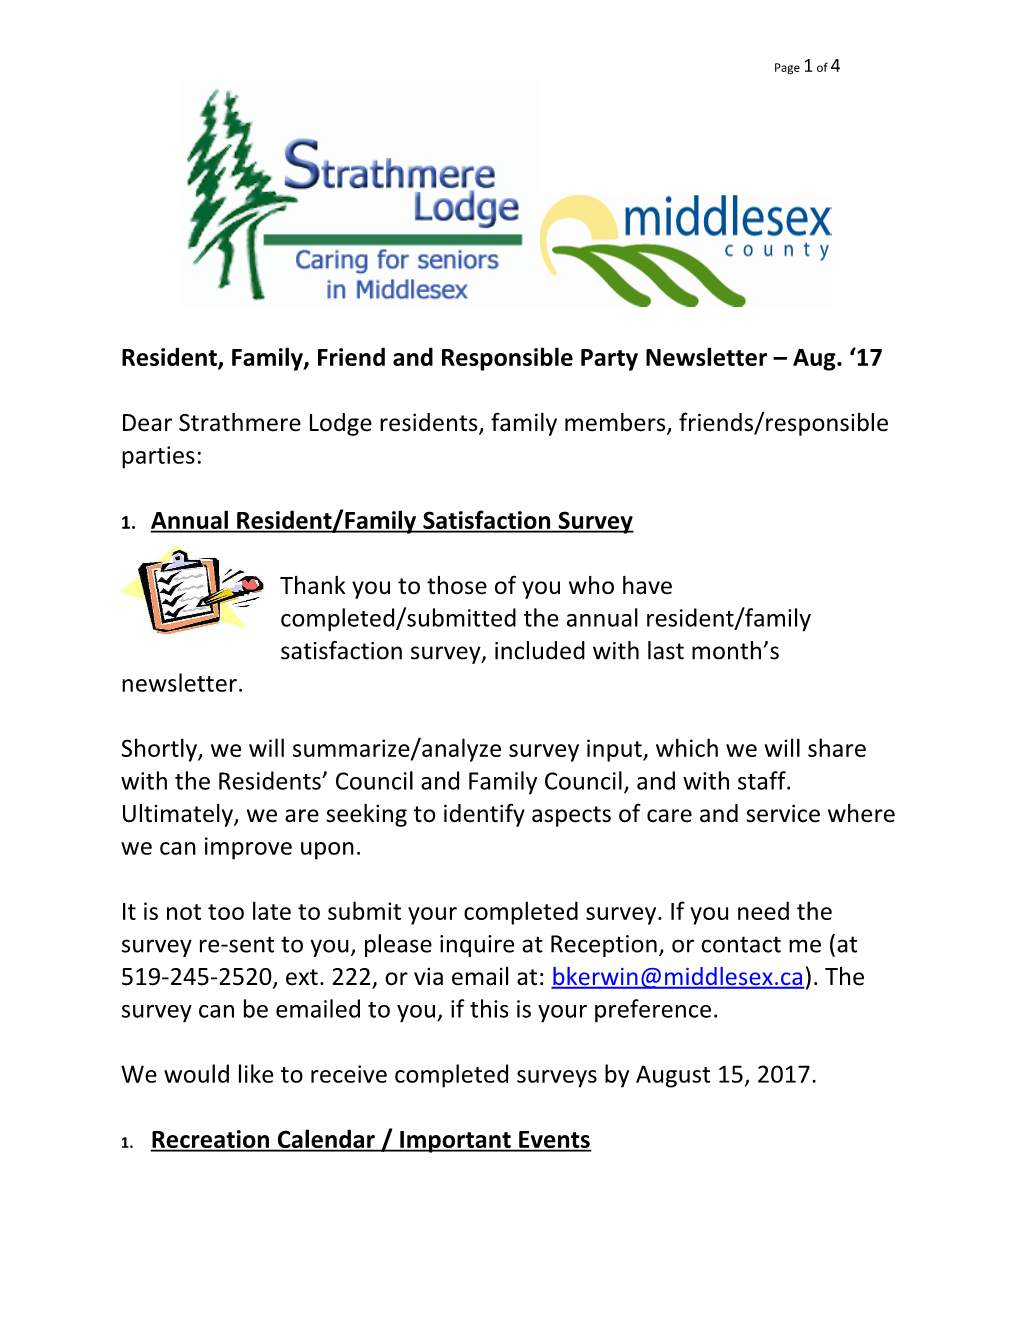 Resident, Family, Friend and Responsiblepartynewsletter Aug. 17